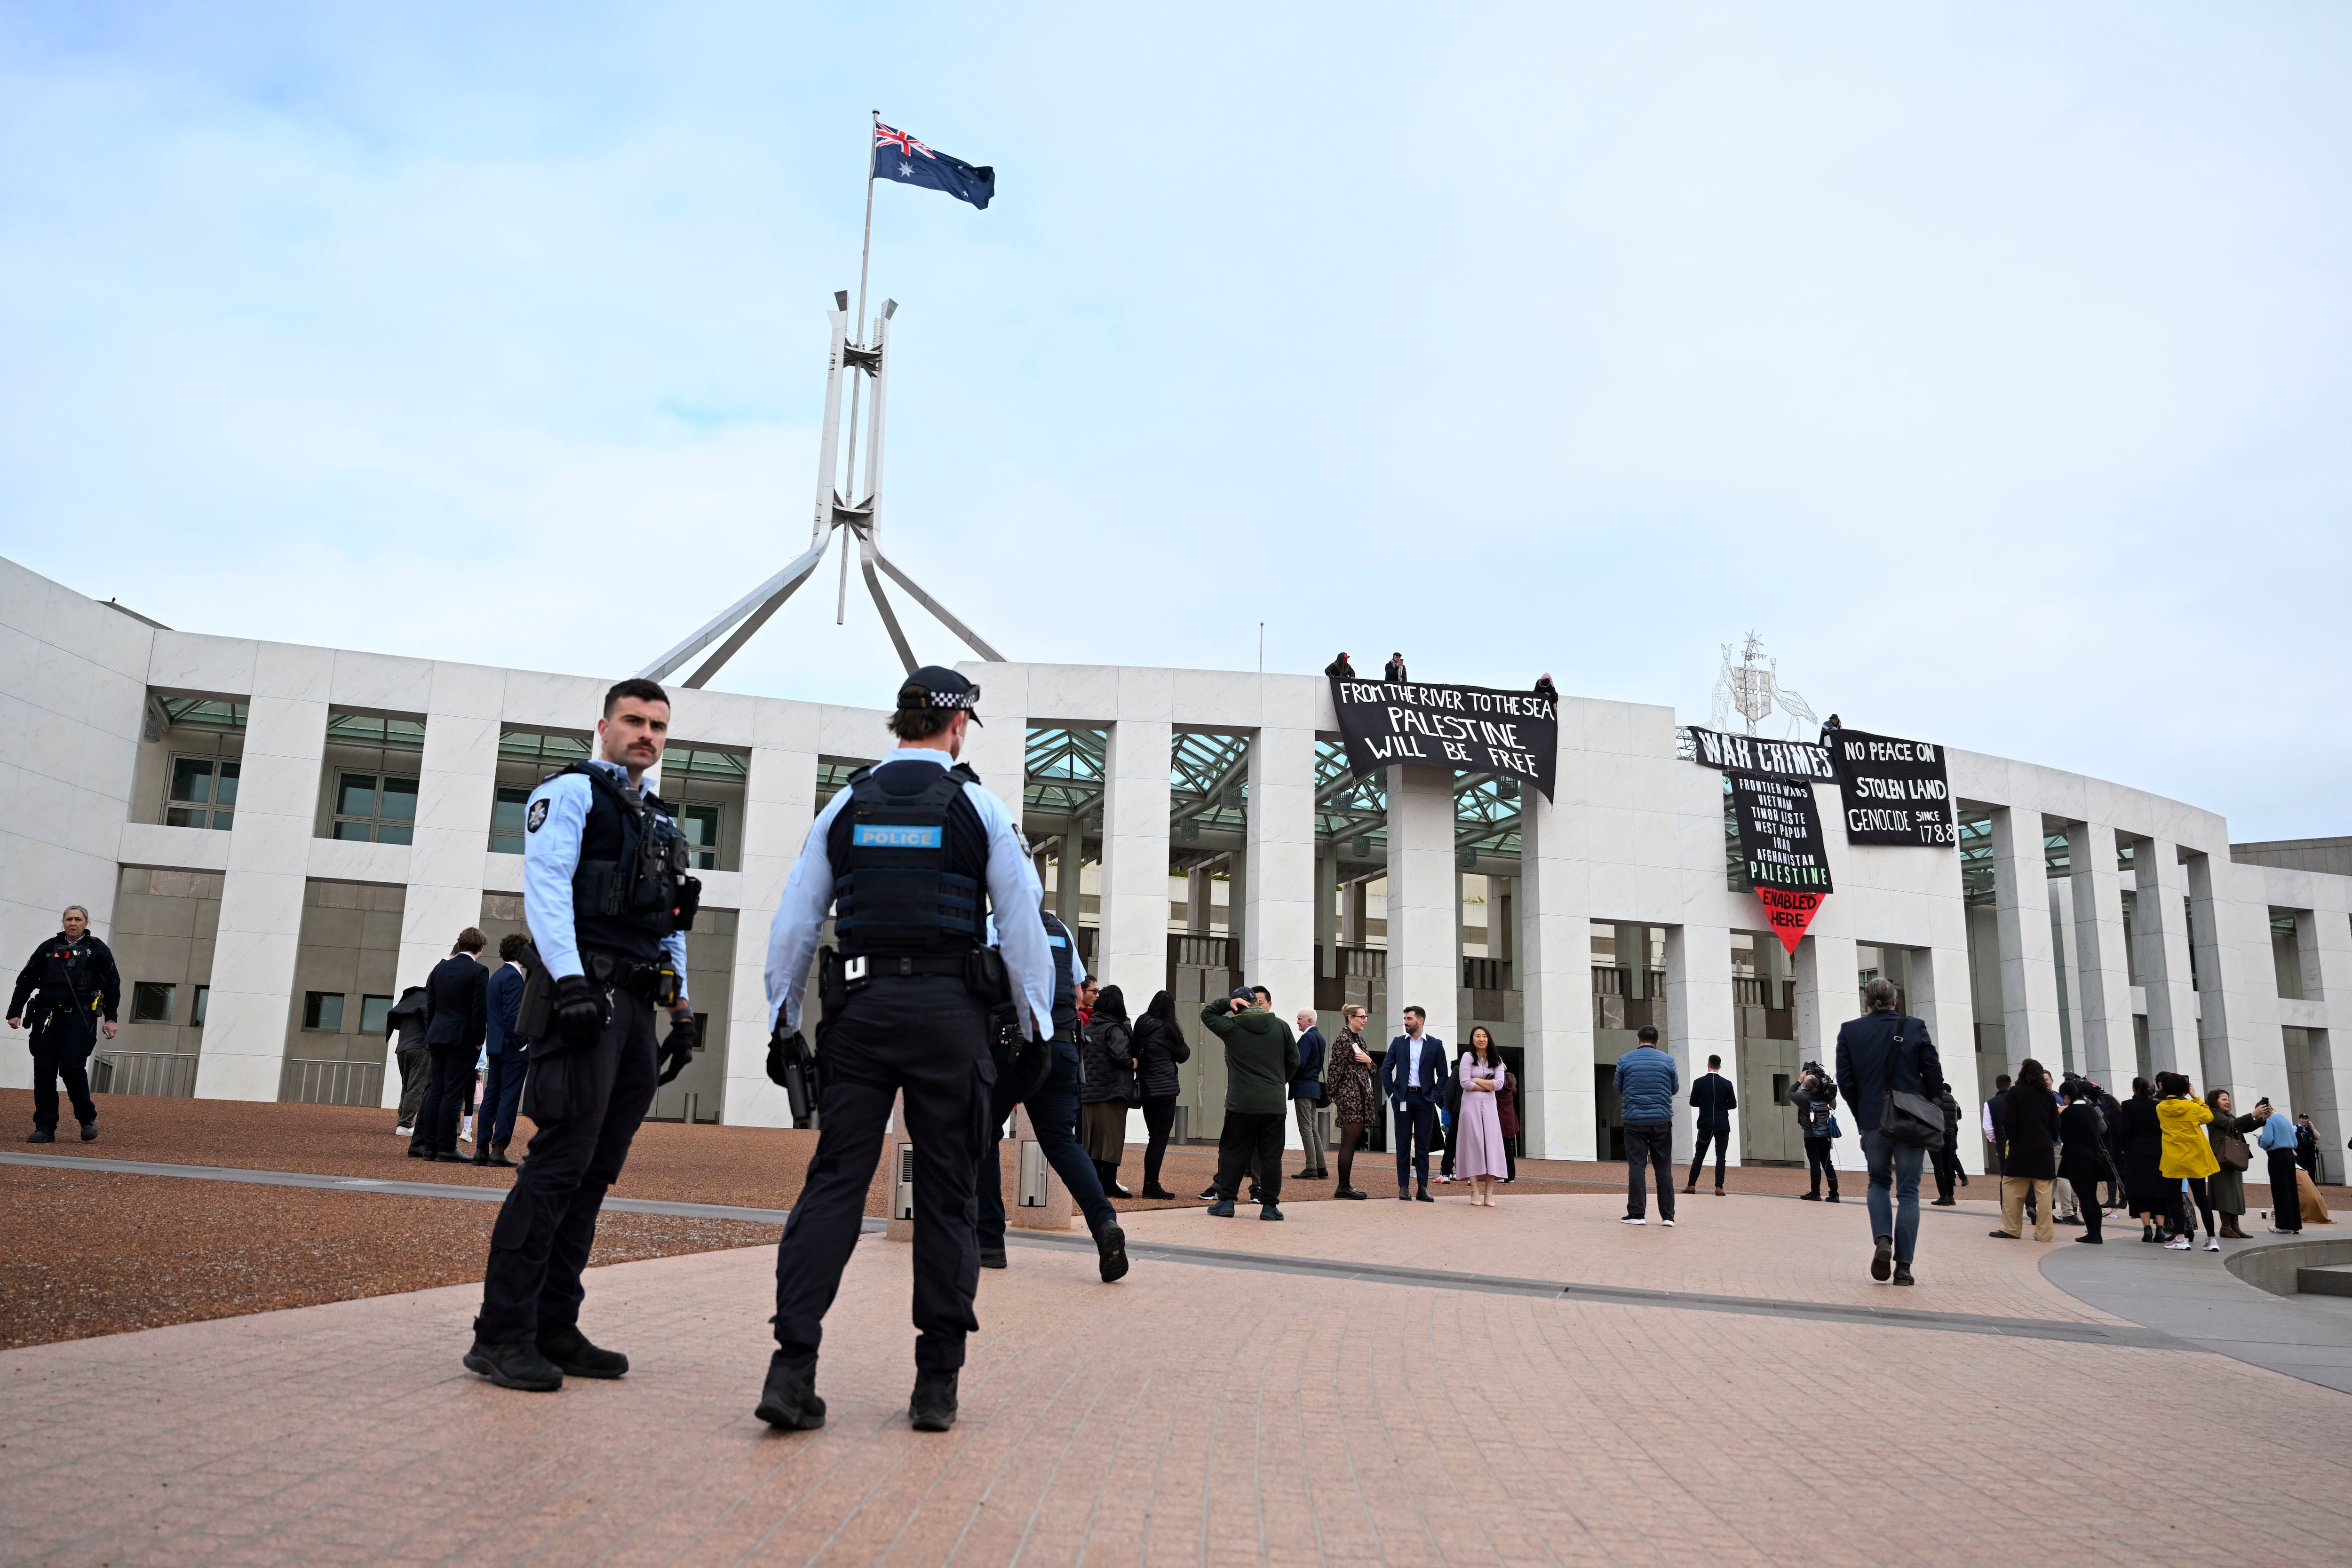 Pro-Palestinian protesters breach security at Australia's Parliament House to unfurl banners thumbnail